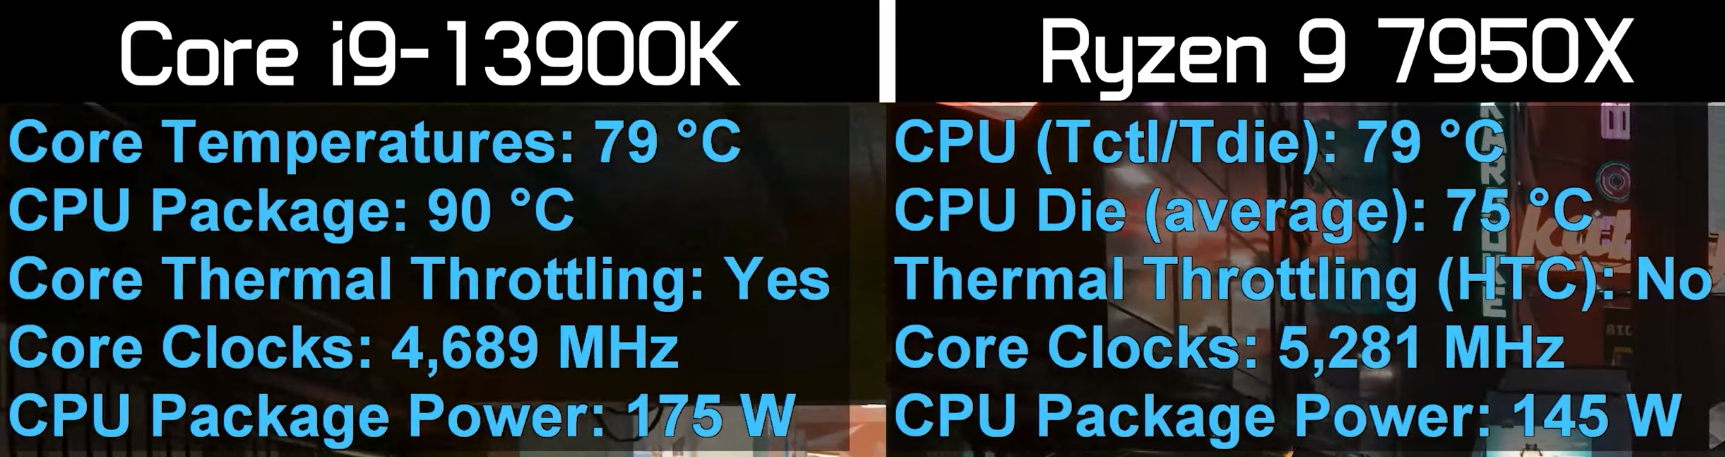 Screenshot 2022-10-20 at 19-37-30 Hot and Hungry - Intel Core i9-13900K Review - YouTube.png